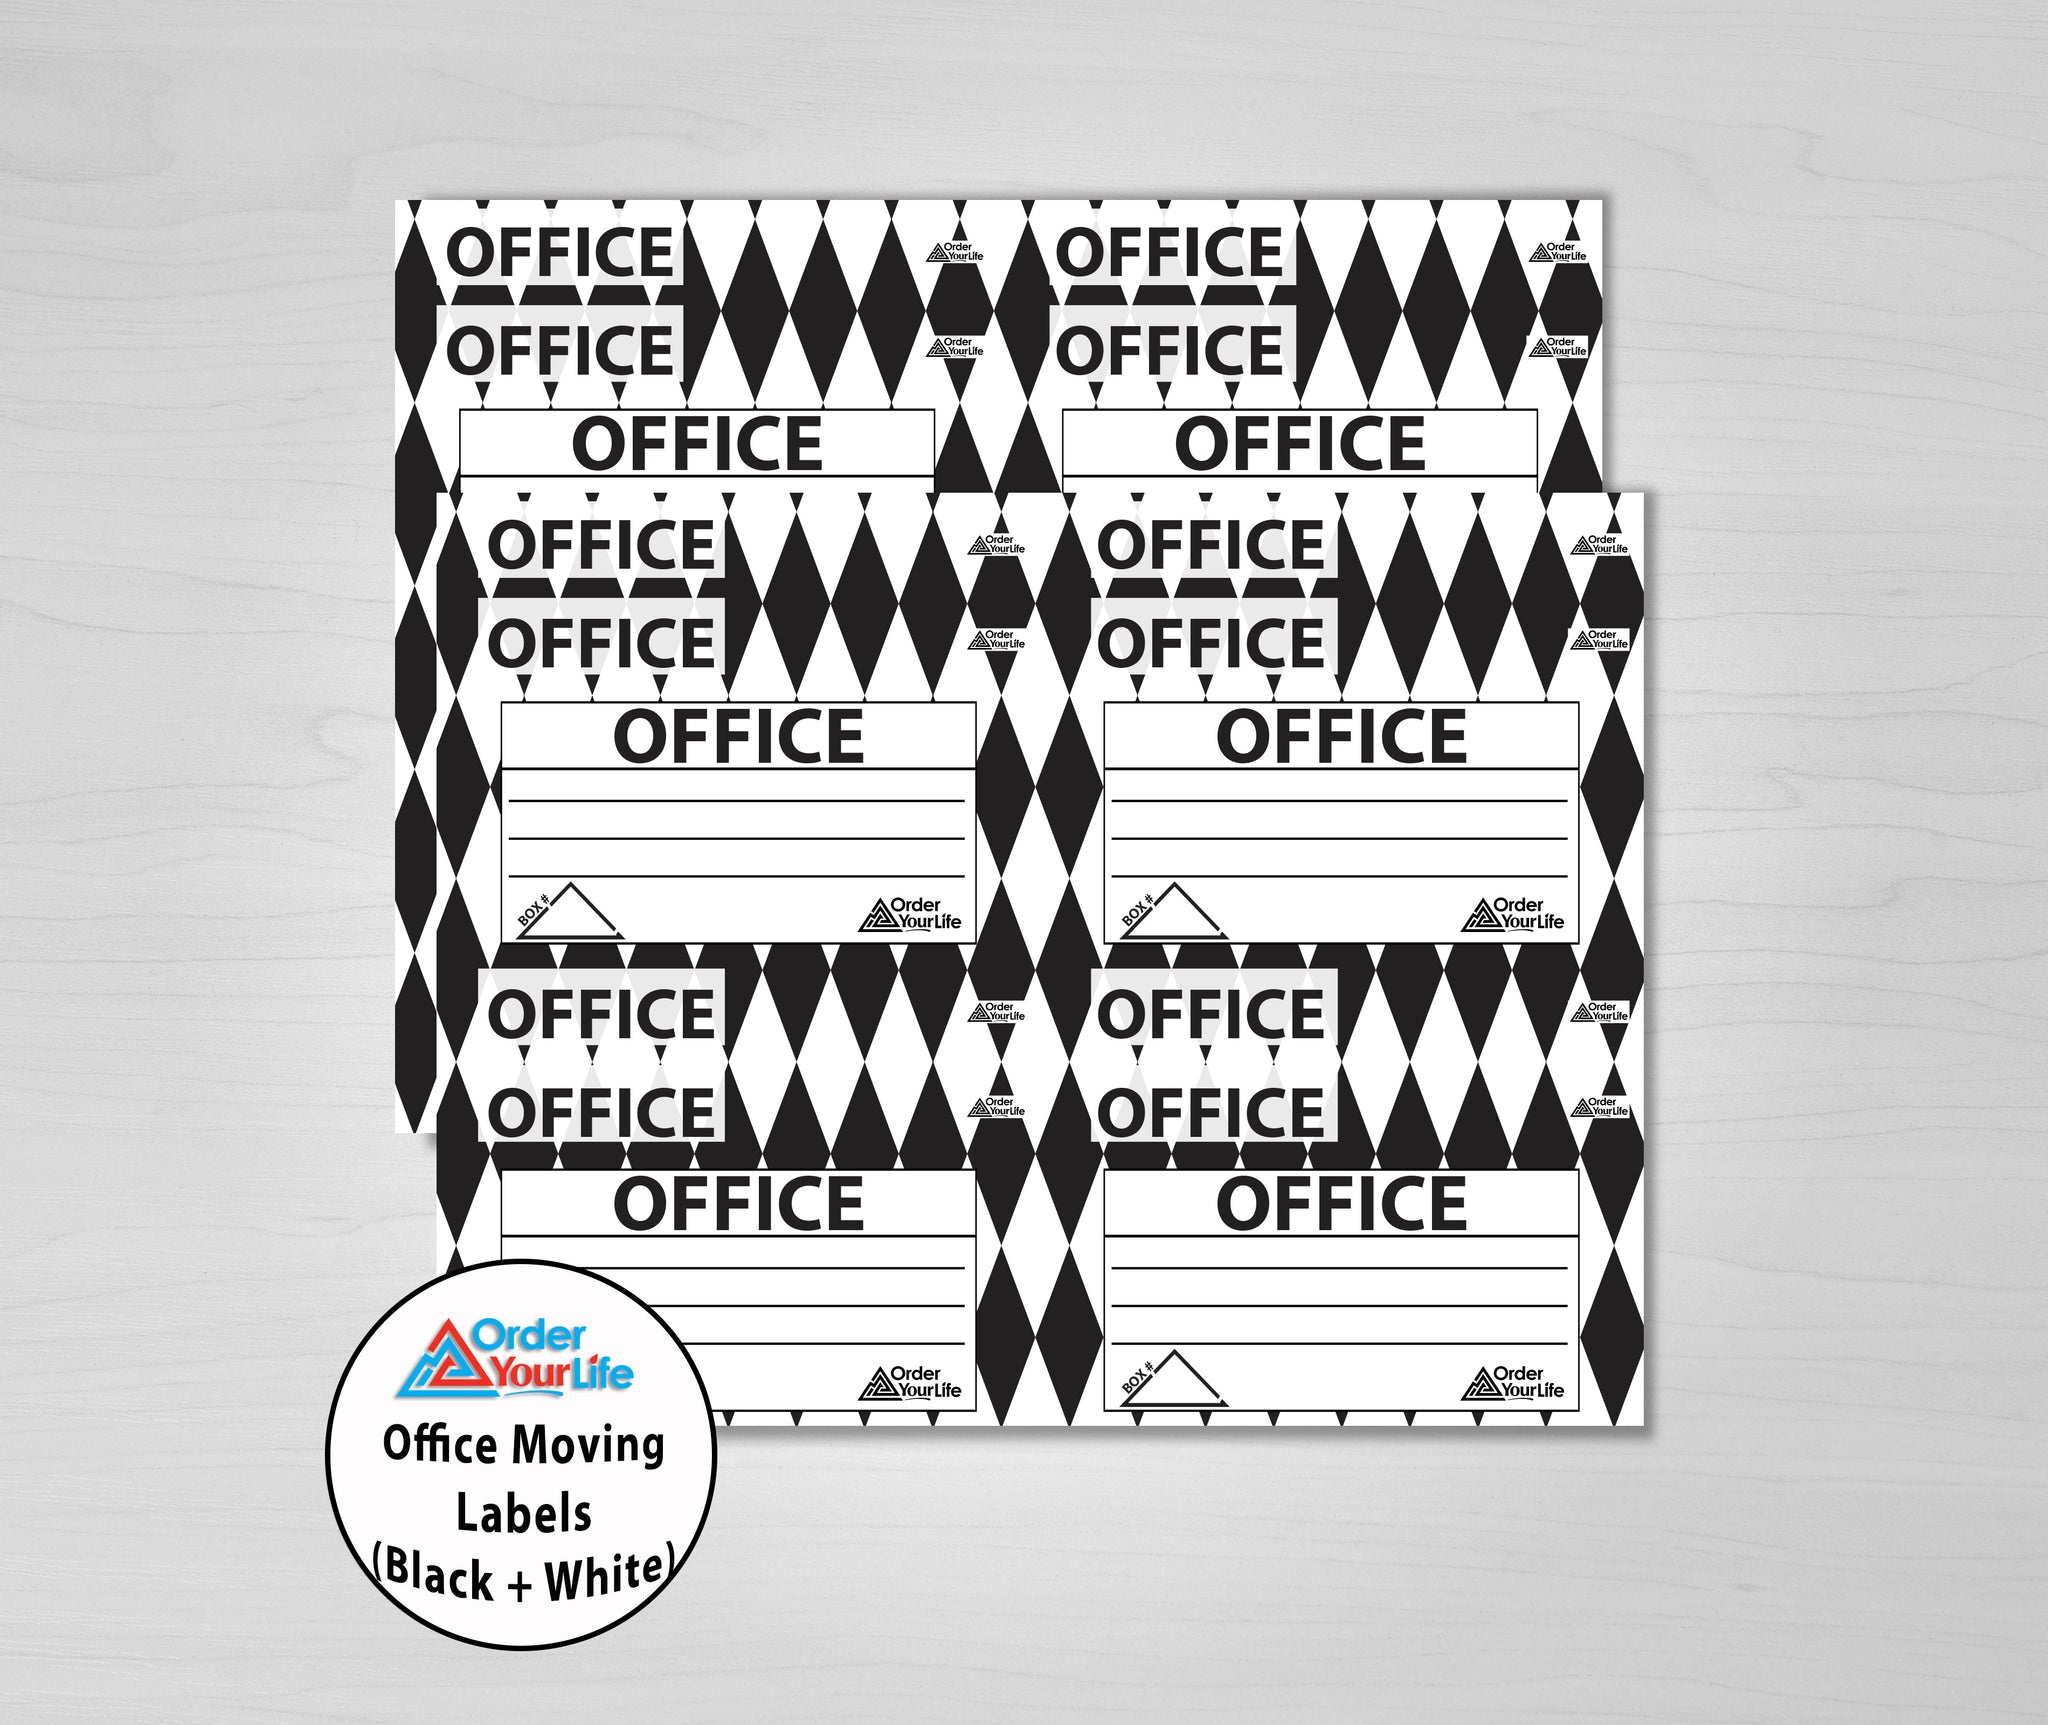 Office Moving Labels (Black + White)